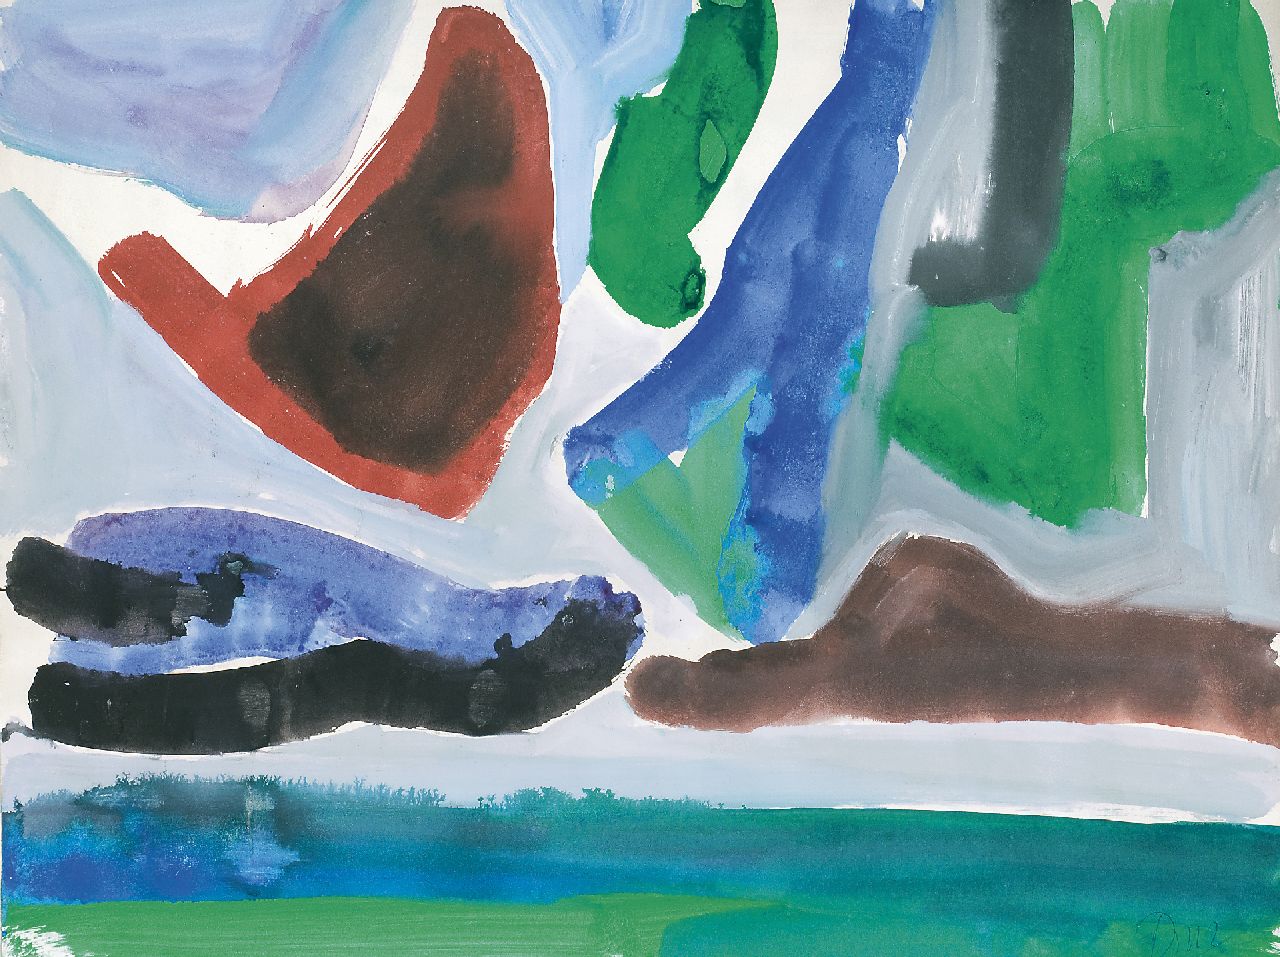 Benner G.  | Gerrit Benner, Landscape, watercolour on paper 49.7 x 64.7 cm, signed l.r. and painted 1970